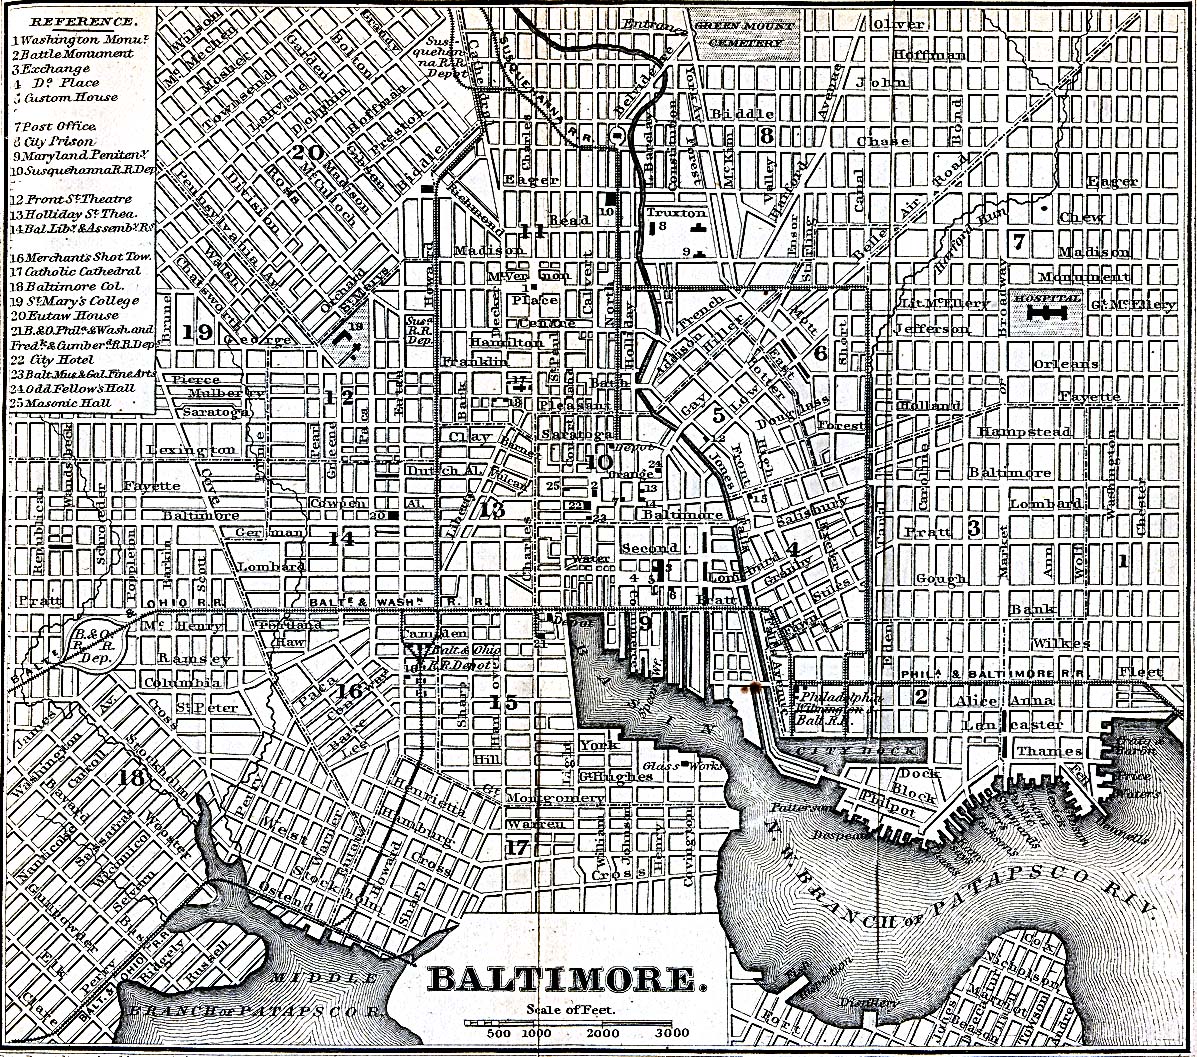 Historical Maps of U.S Cities. Baltimore, Maryland 1848 Appletons' Hand-Book of American Travel. New York: D. Appleton and Company, 1869 (723K) 